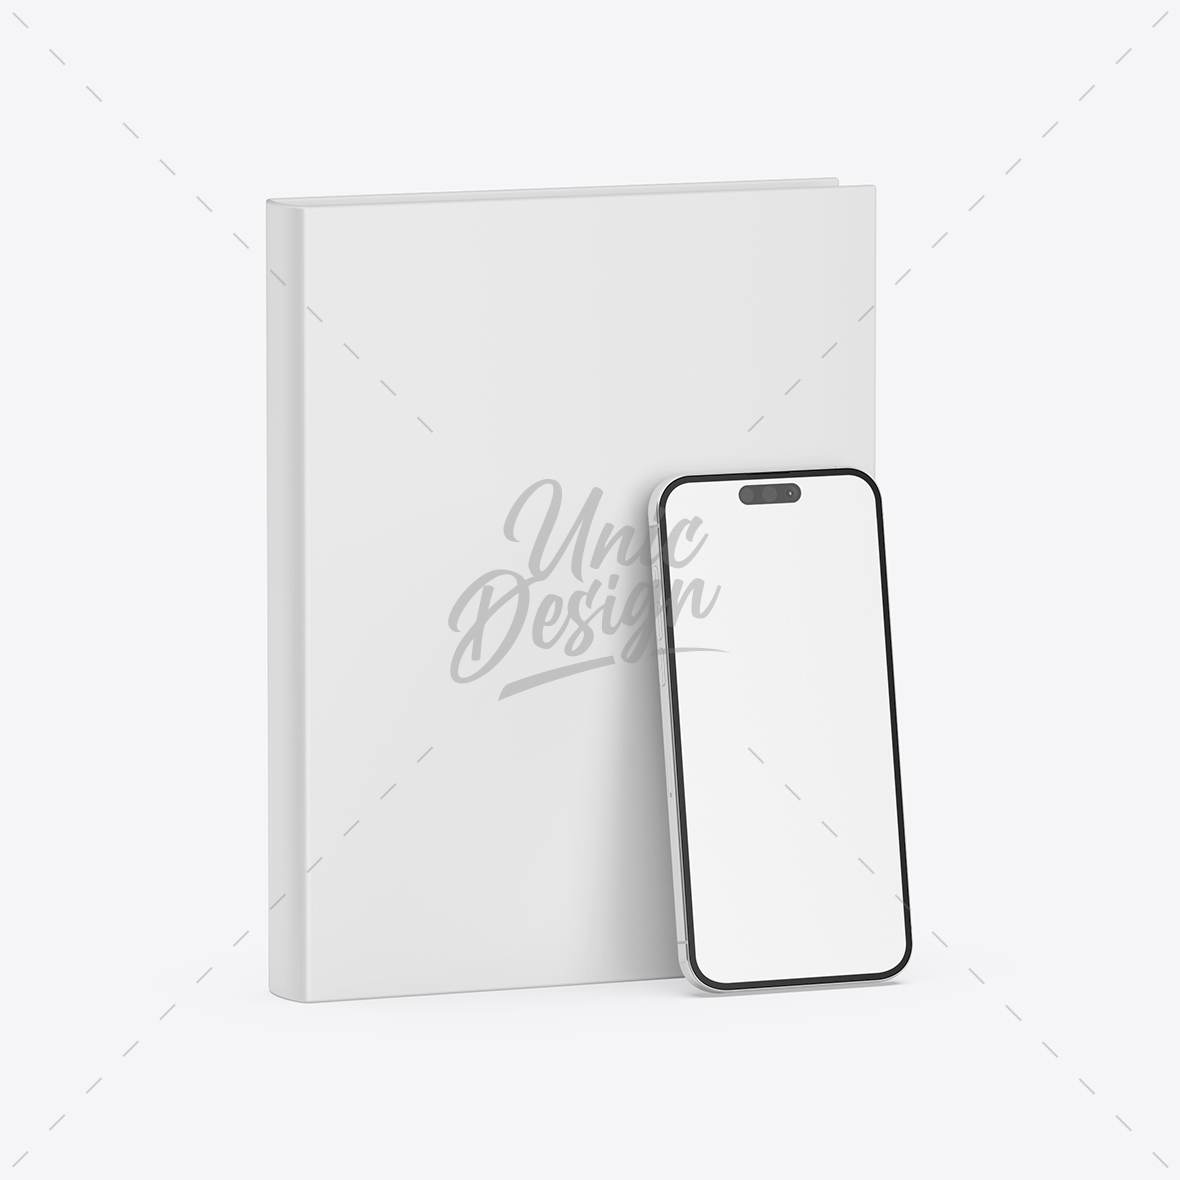 US Letter Book & iPhone 15 Mockup